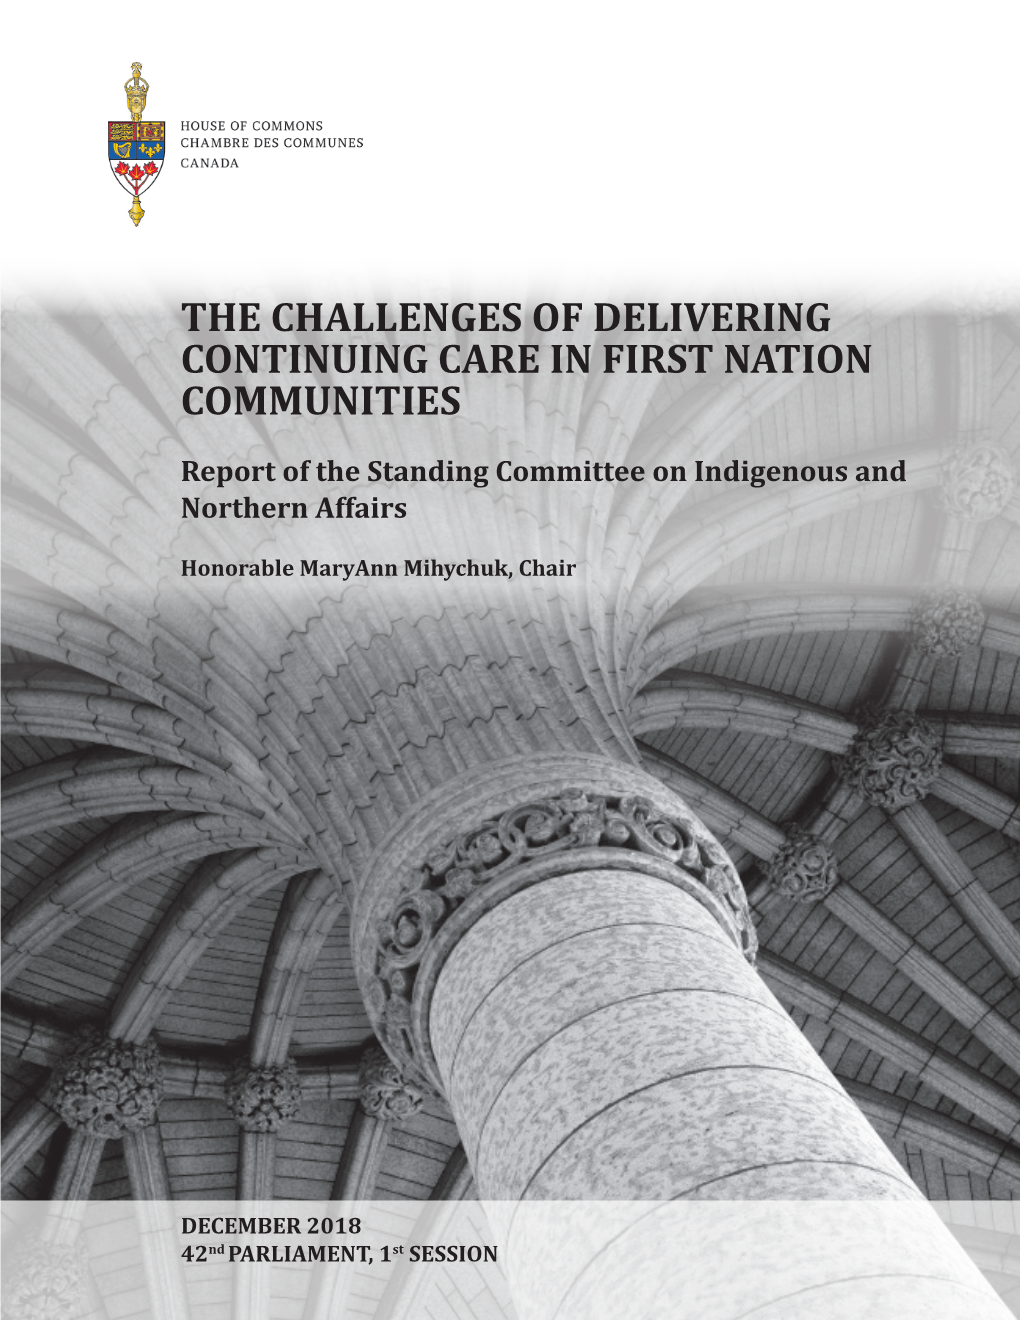 The Challenges of Delivering Continuing Care in First Nations Communities